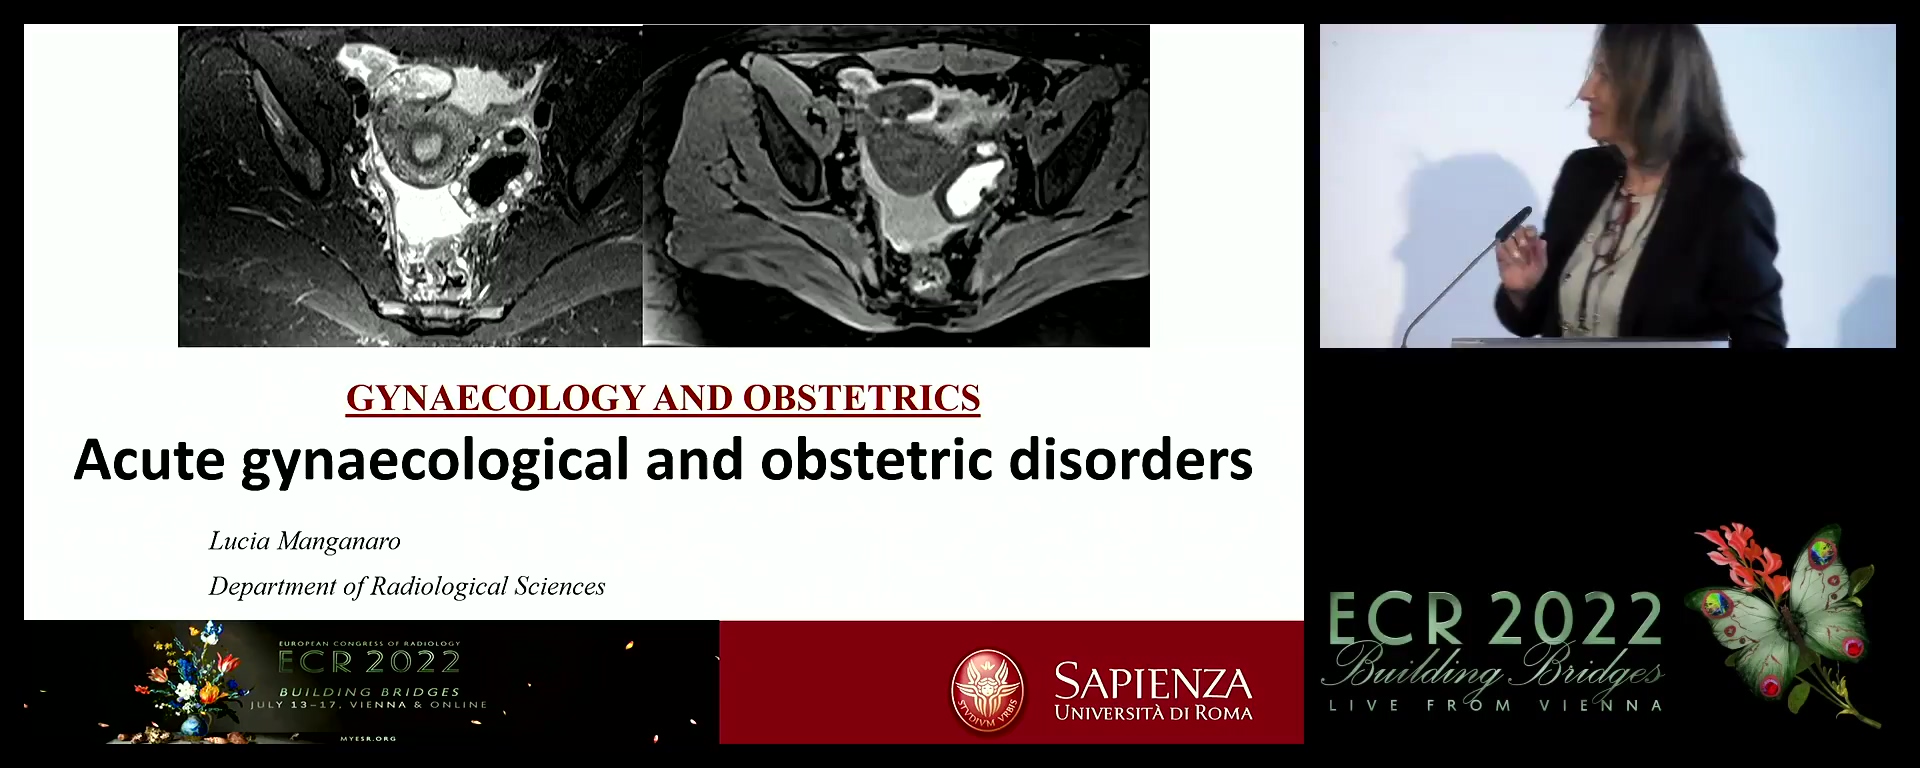 Acute gynaecological and obstetric disorders